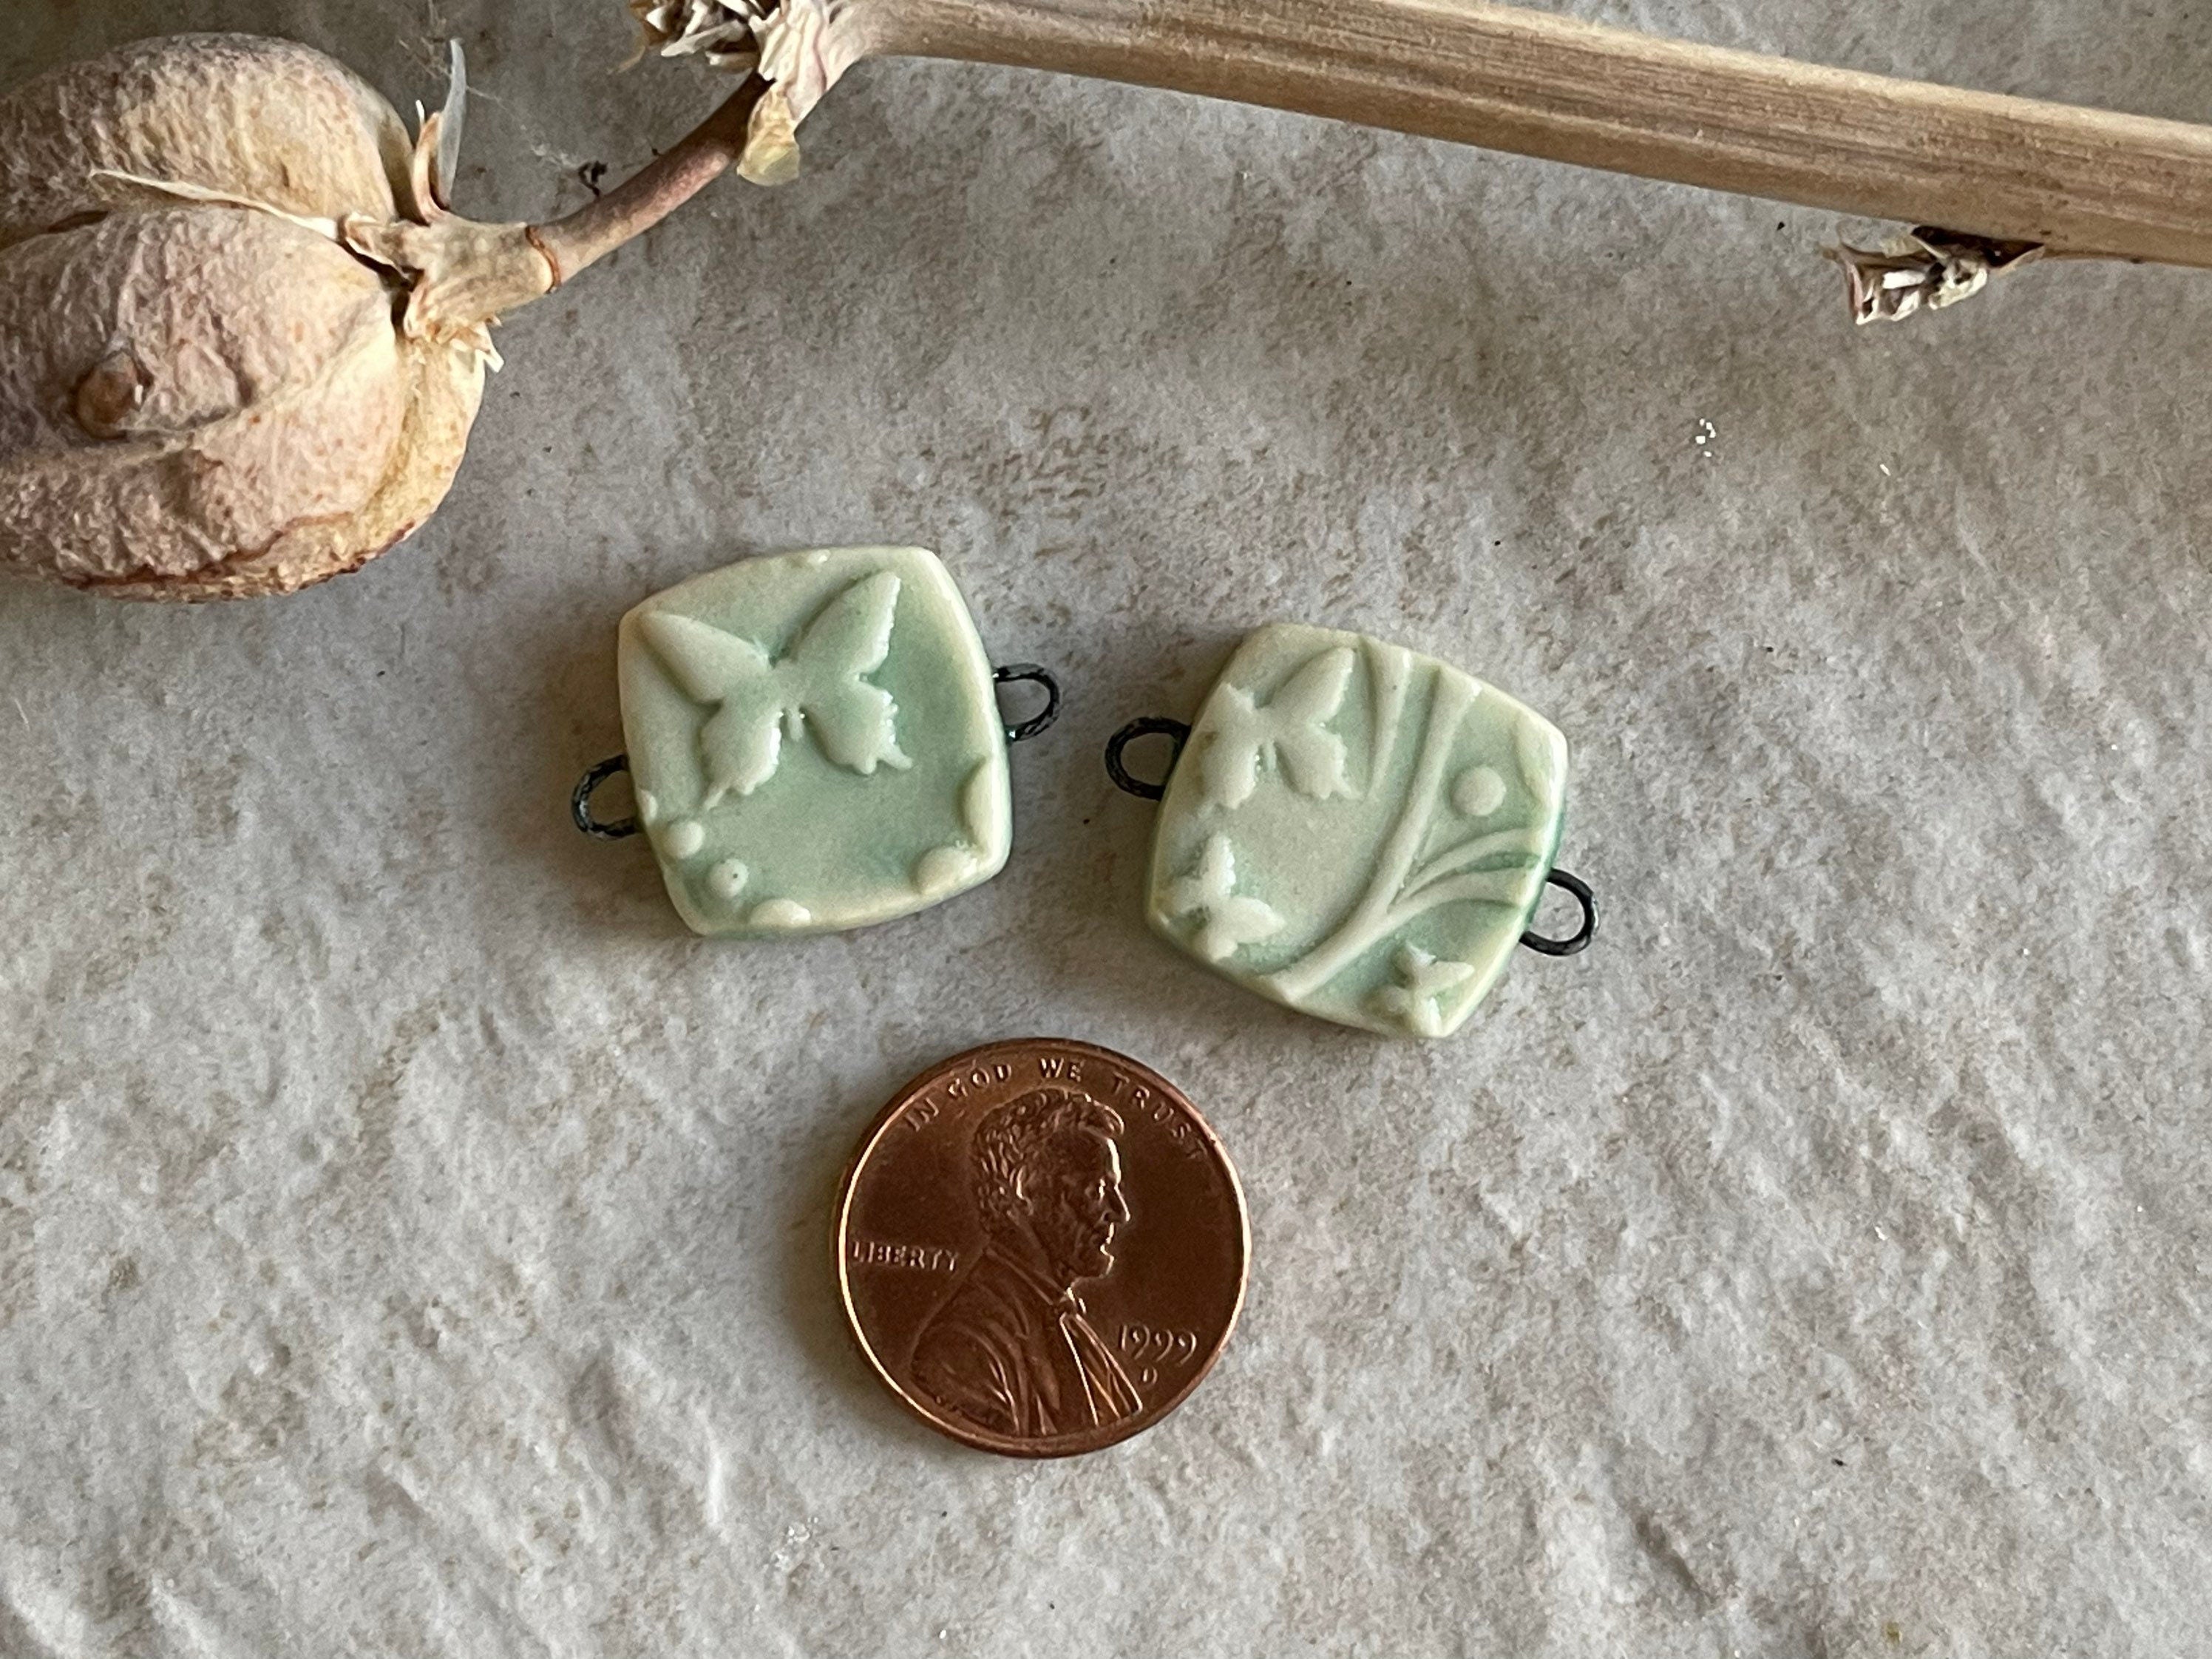 Turquoise Bead Set, Porcelain Beads, Hearts and Butterflies Bead Set, Ceramic Charms, Jewelry Making Components, DIY Bracelet